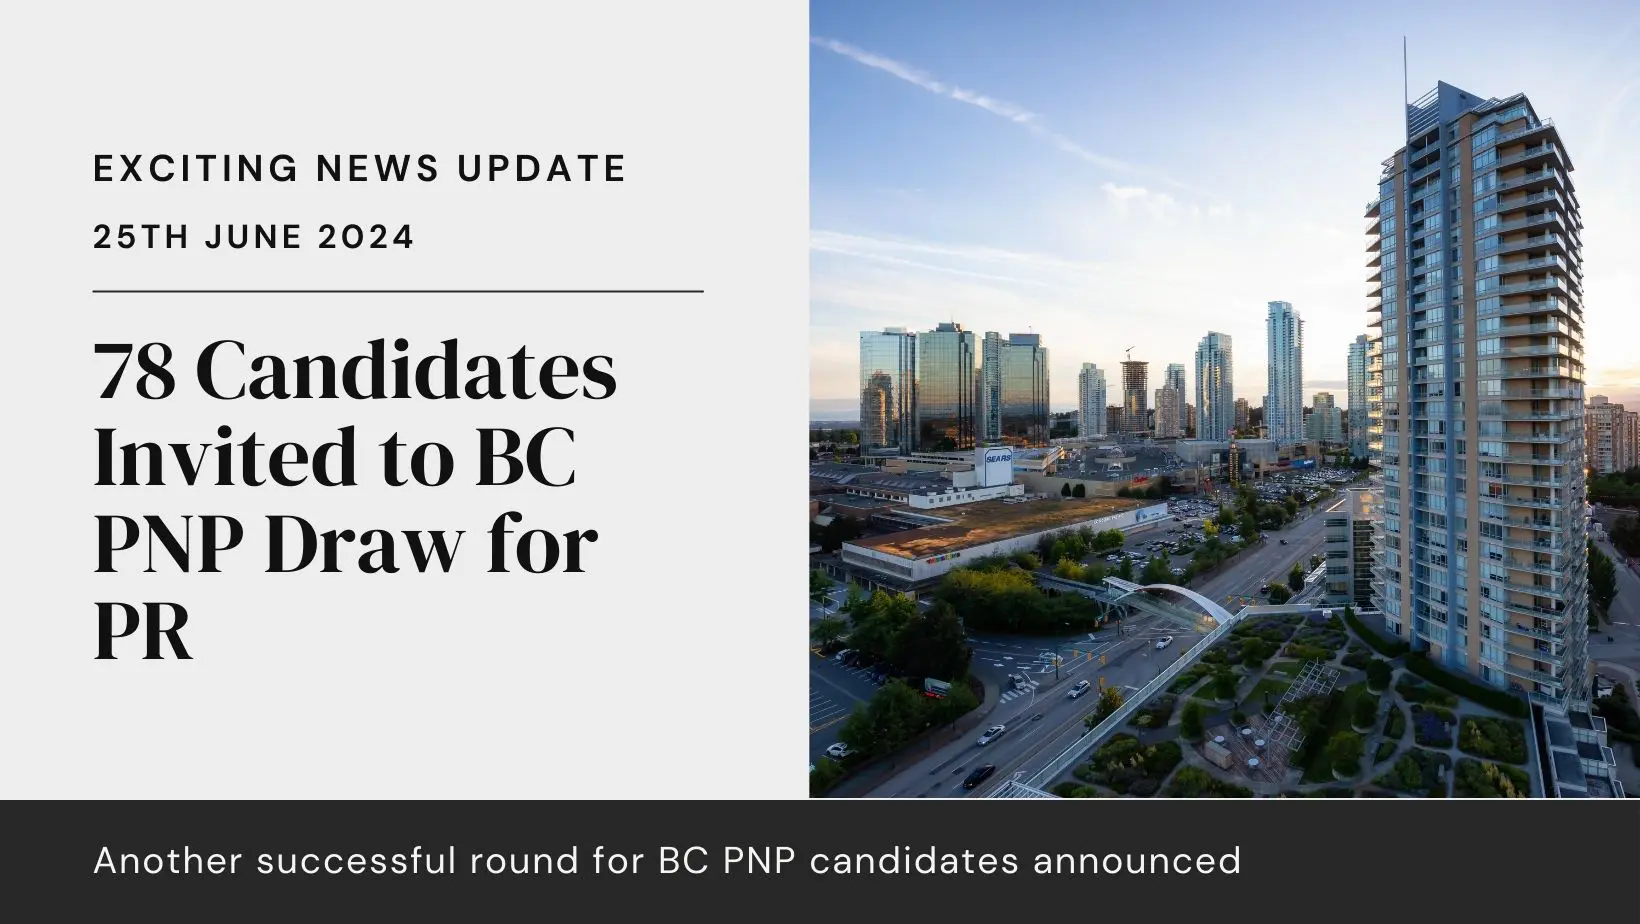 bc pnp draw sent 78 invitation for permanent residency